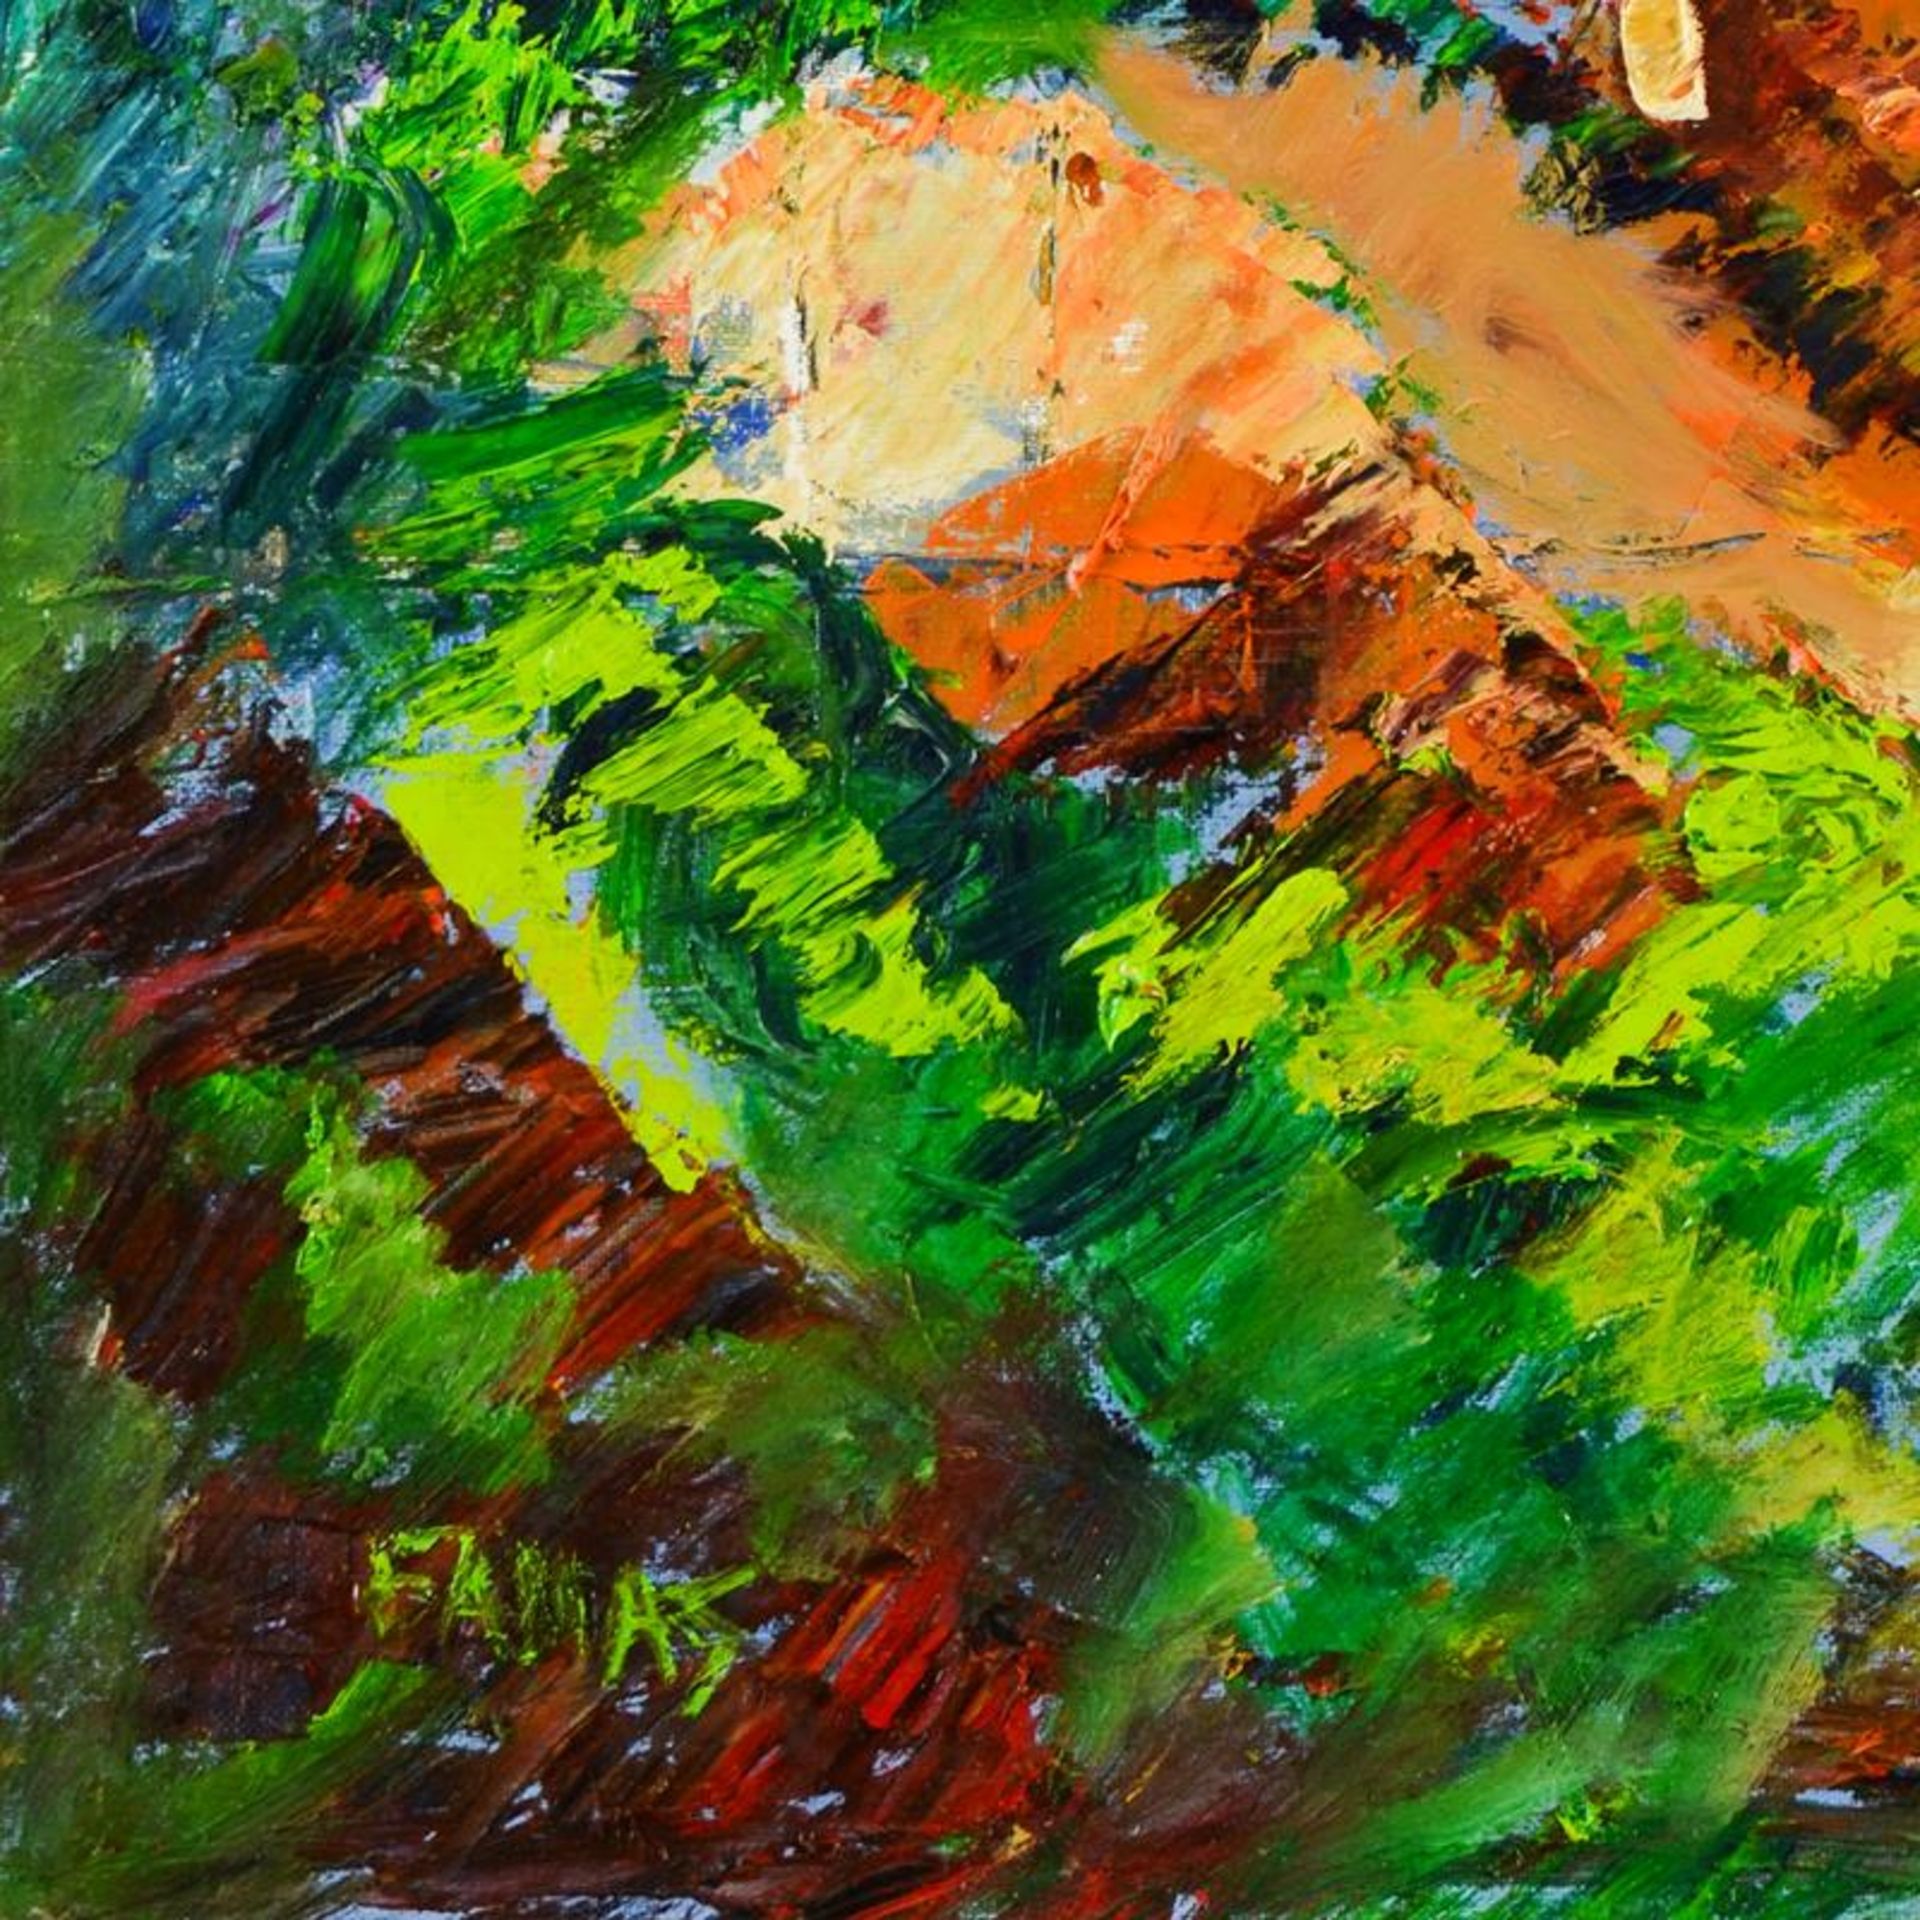 Elliot Fallas, "Rocky Mountain High" Original Oil Painting on Canvas, Hand Signe - Image 2 of 2